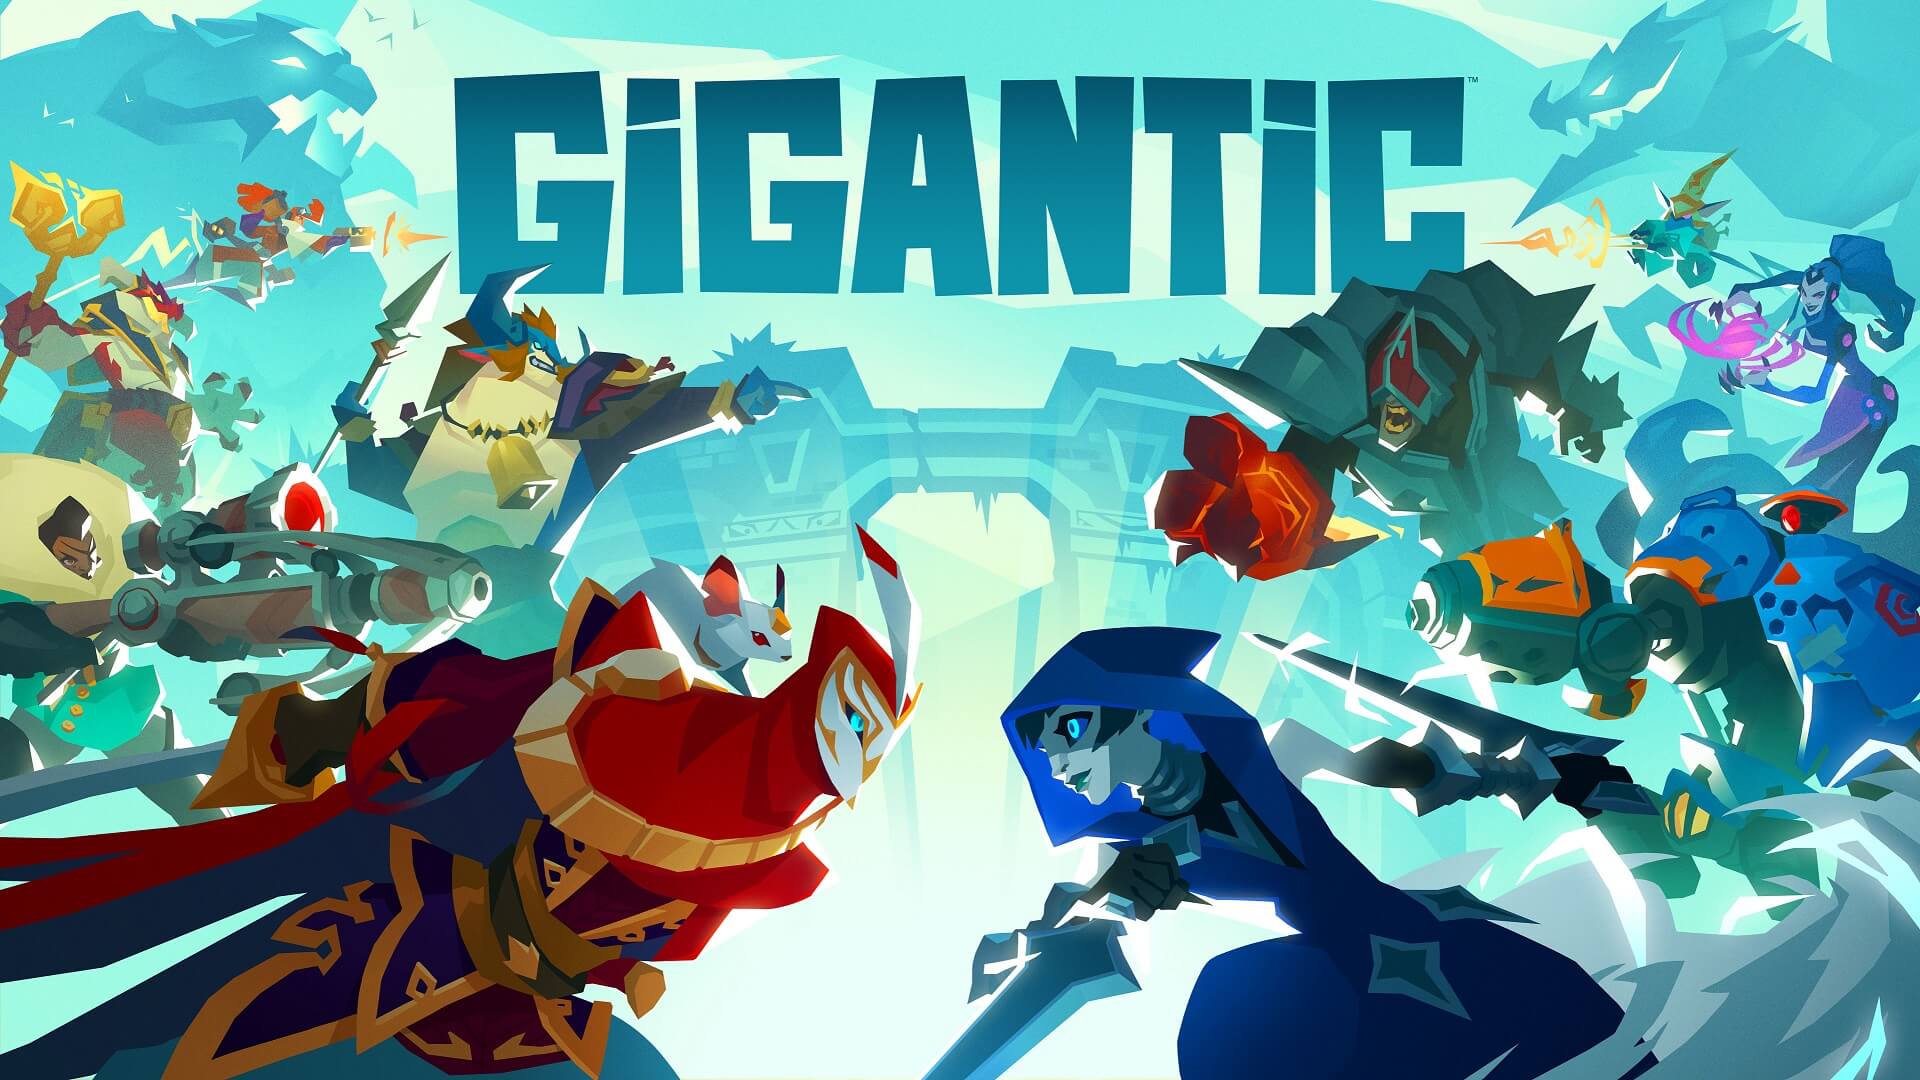 5 Years After It Was Shut Down, Gigantic Makes Return For Special Event